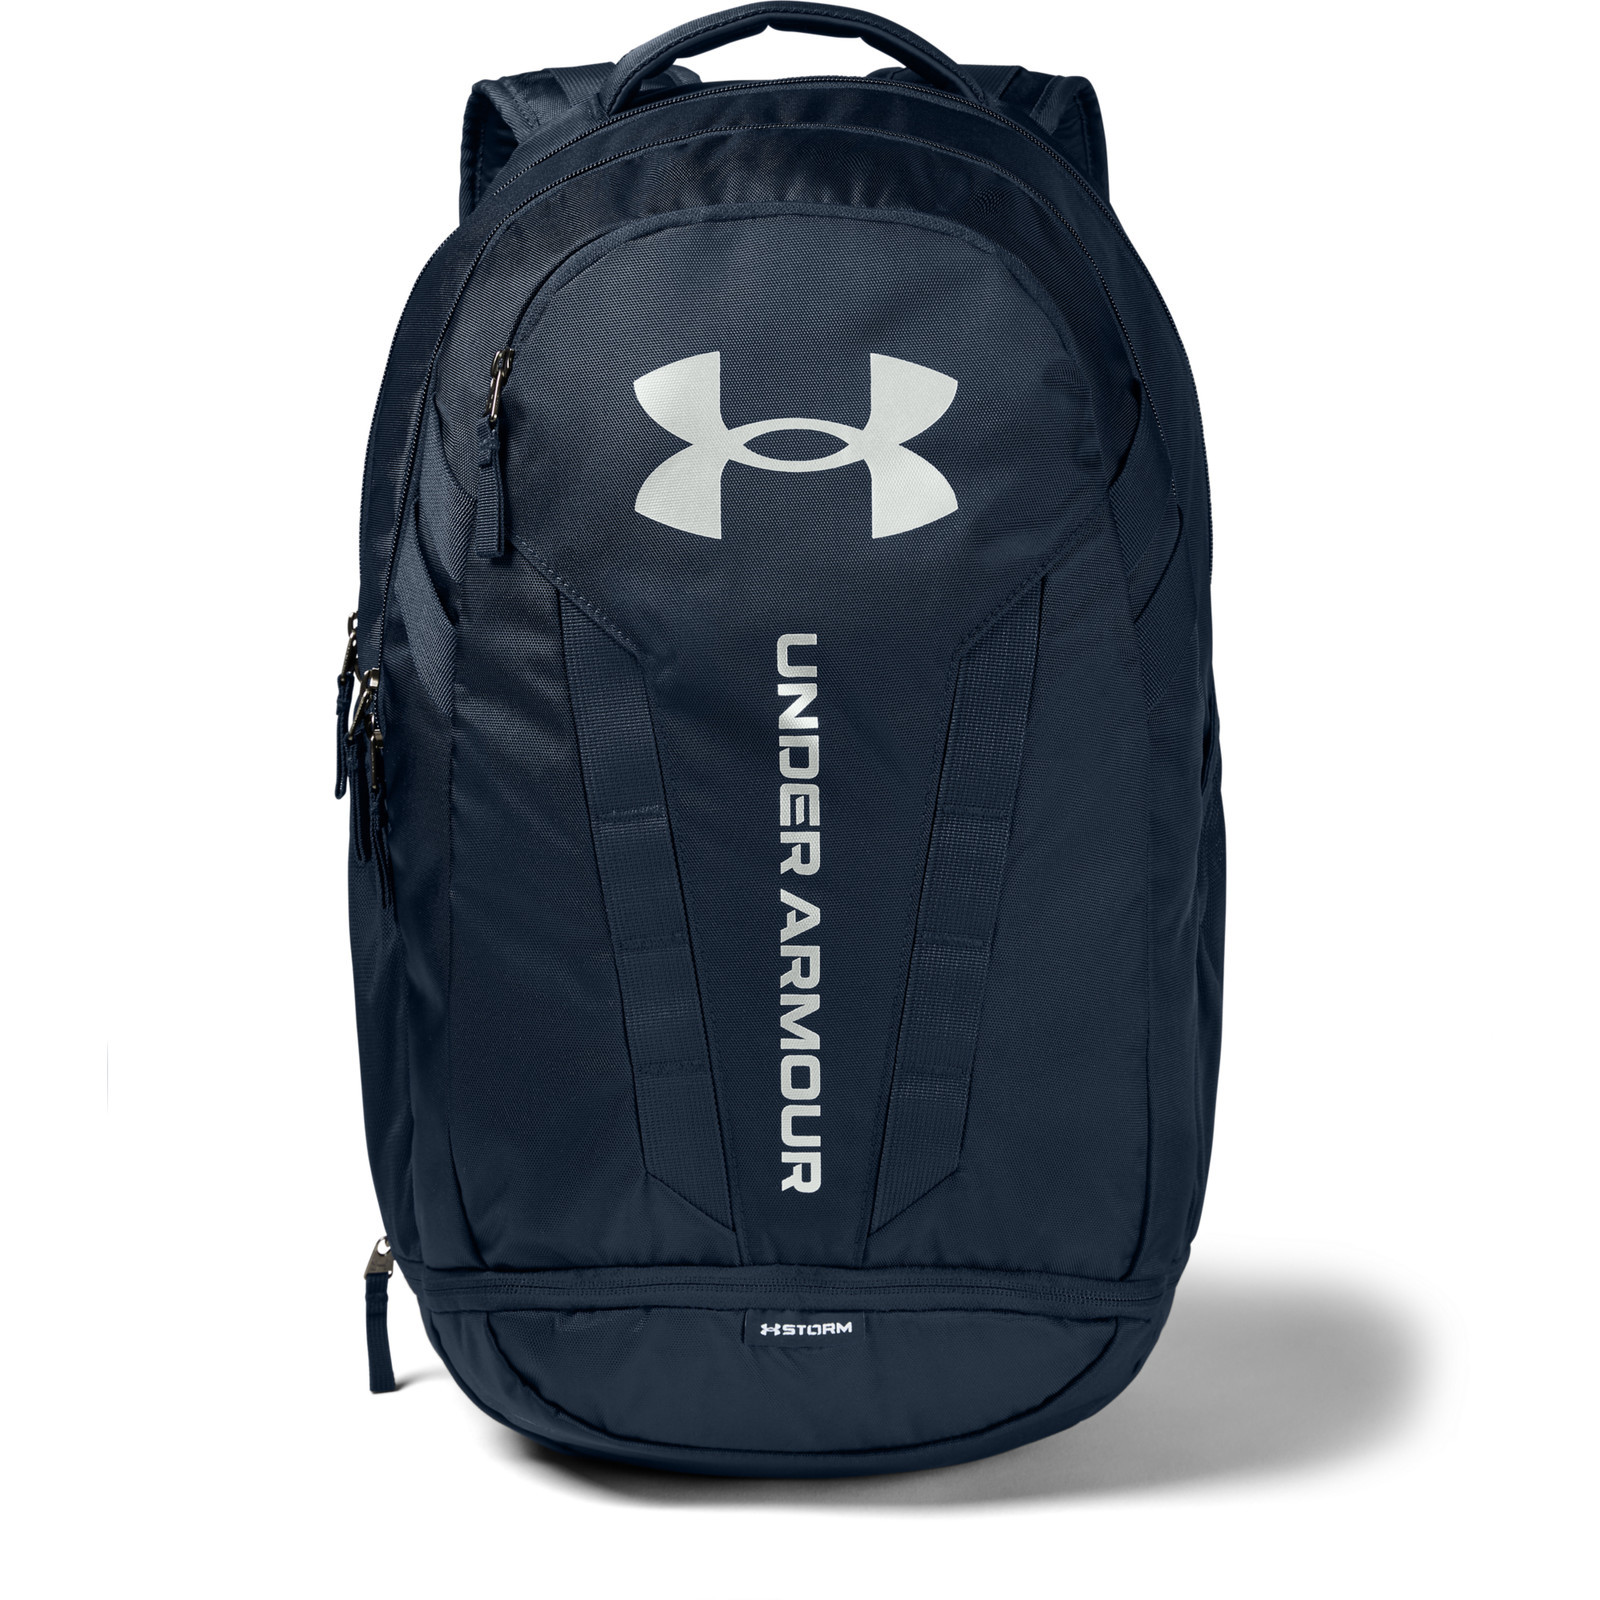 Under Armour Hustle 5.0 Backpack Navy/ Academy/ Silver